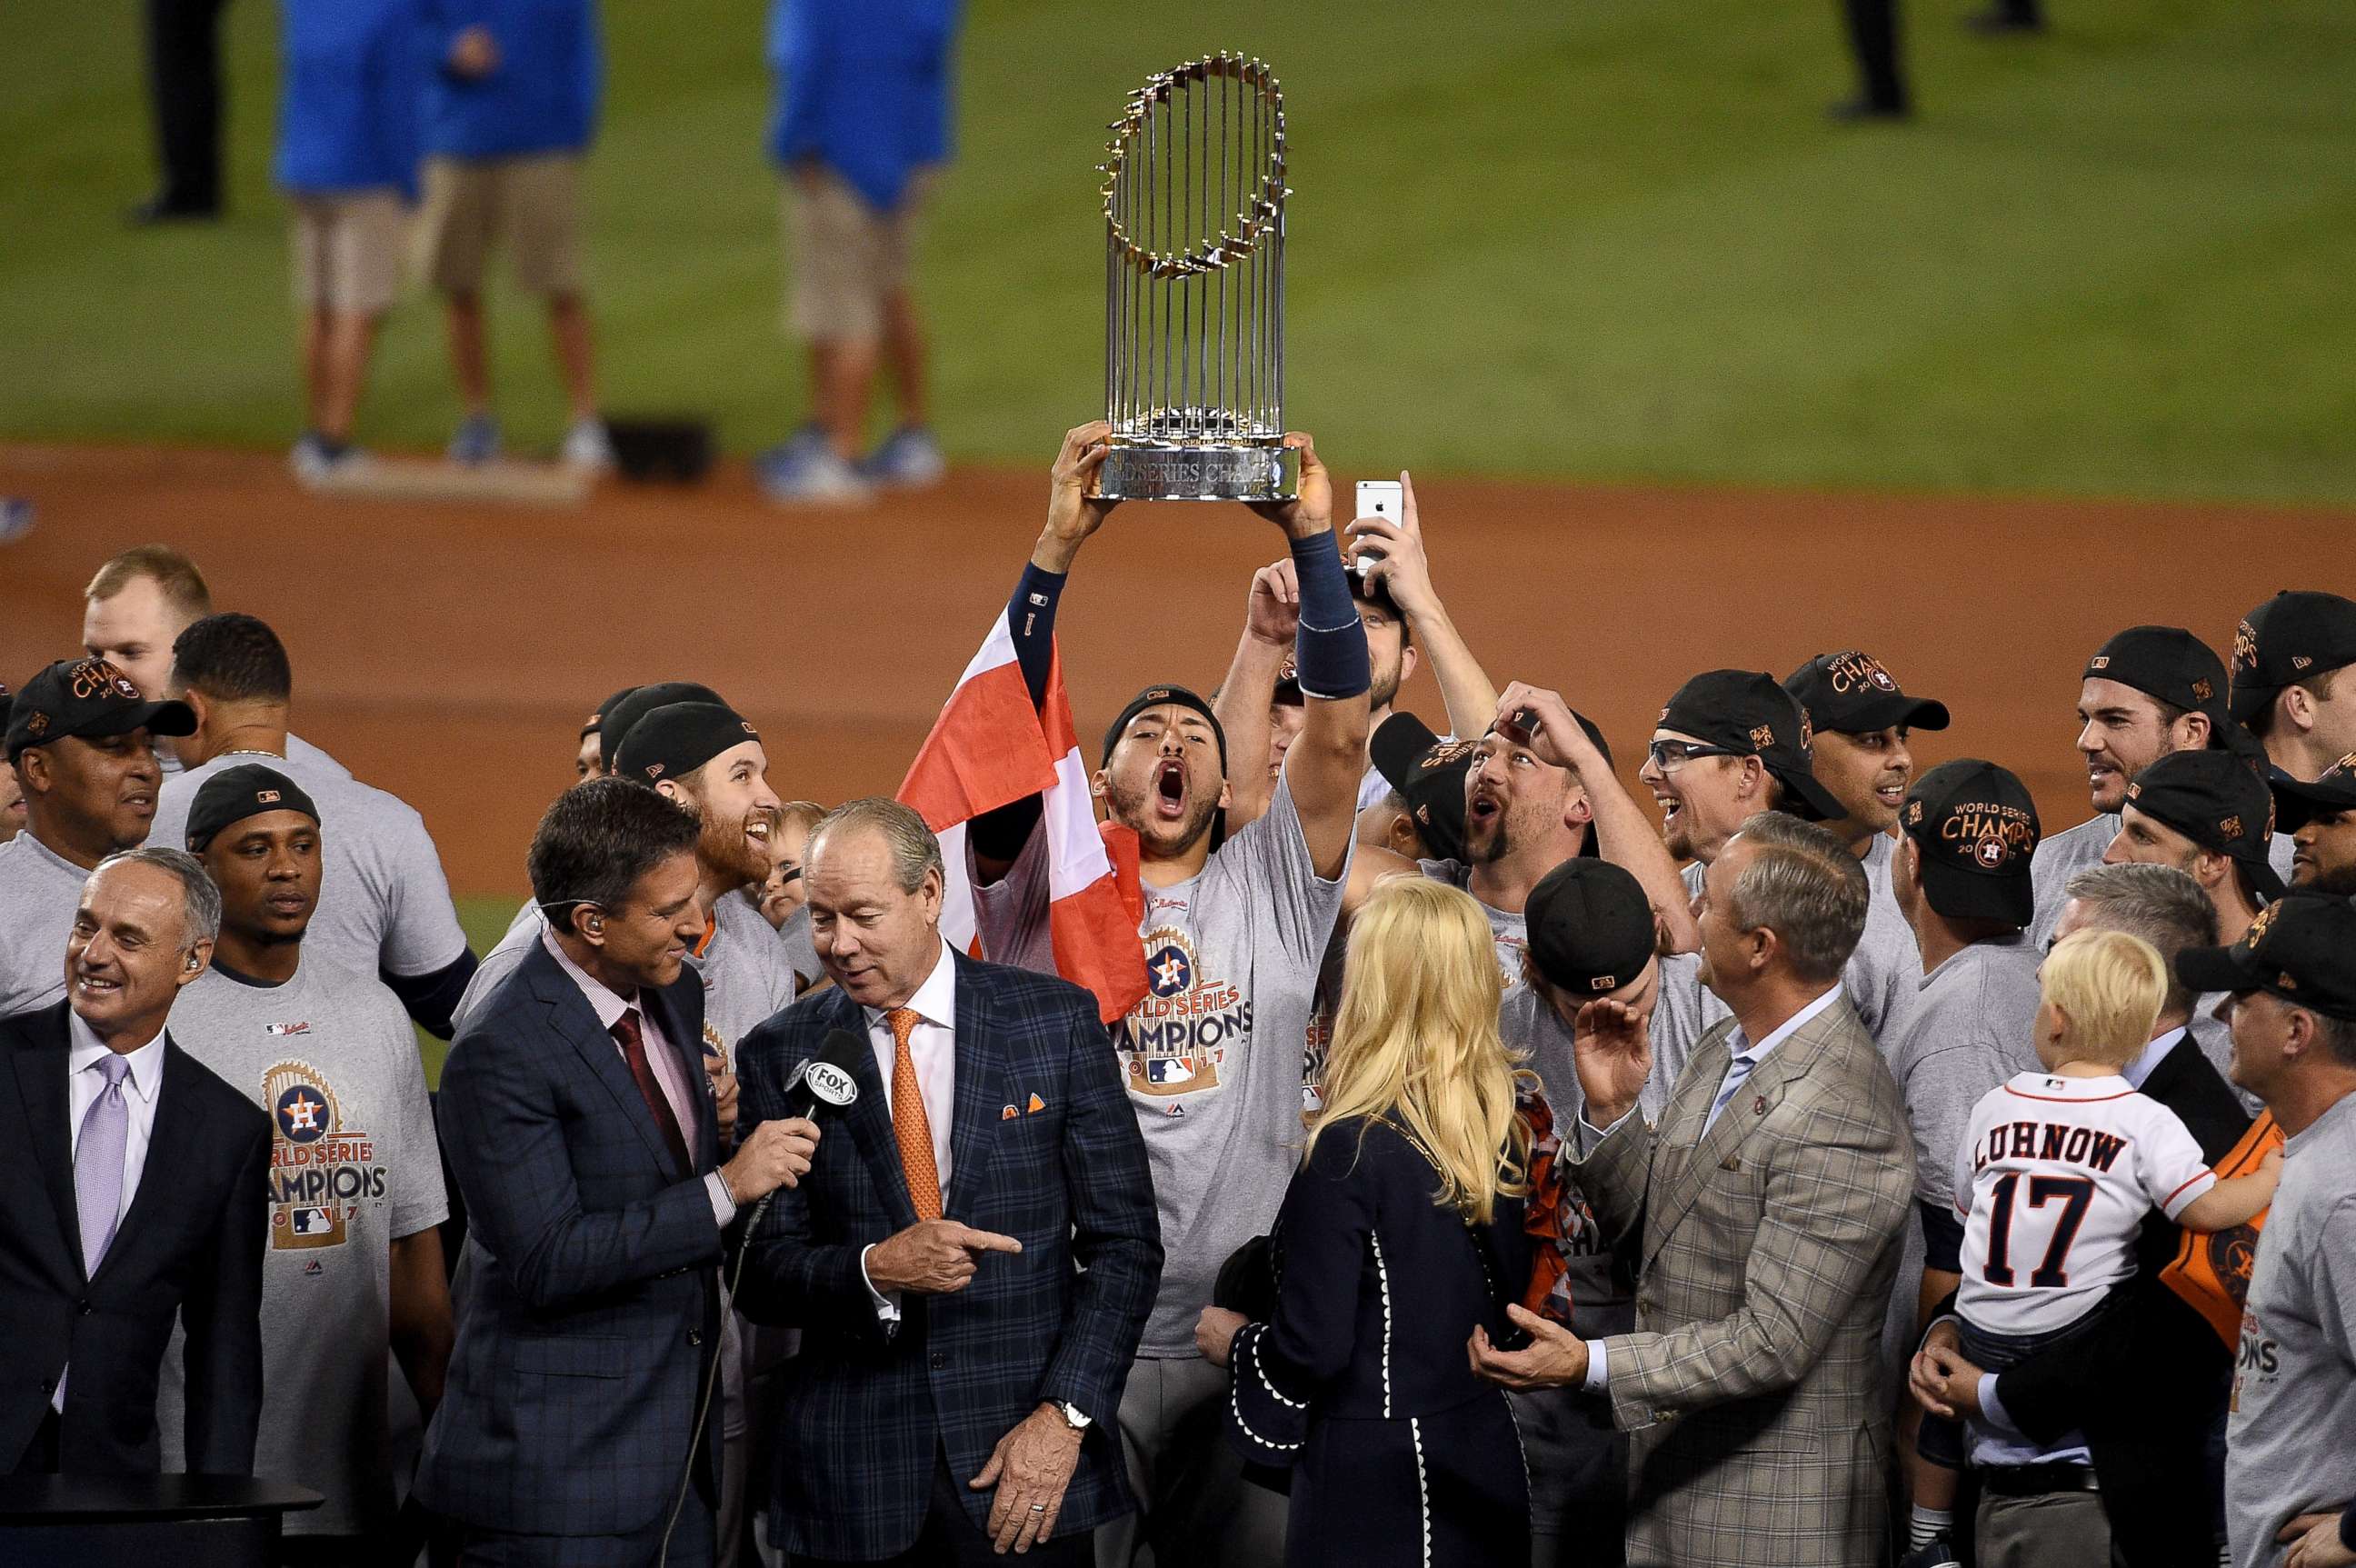 PHOTO: Carlos Correa, #1 of the Houston Astros, hoists the Commissioner's Trophy after defeating the Los Angeles Dodgers 5-1 in game seven to win the 2017 World Series at Dodger Stadium on Nov. 1, 2017, in Los Angeles.